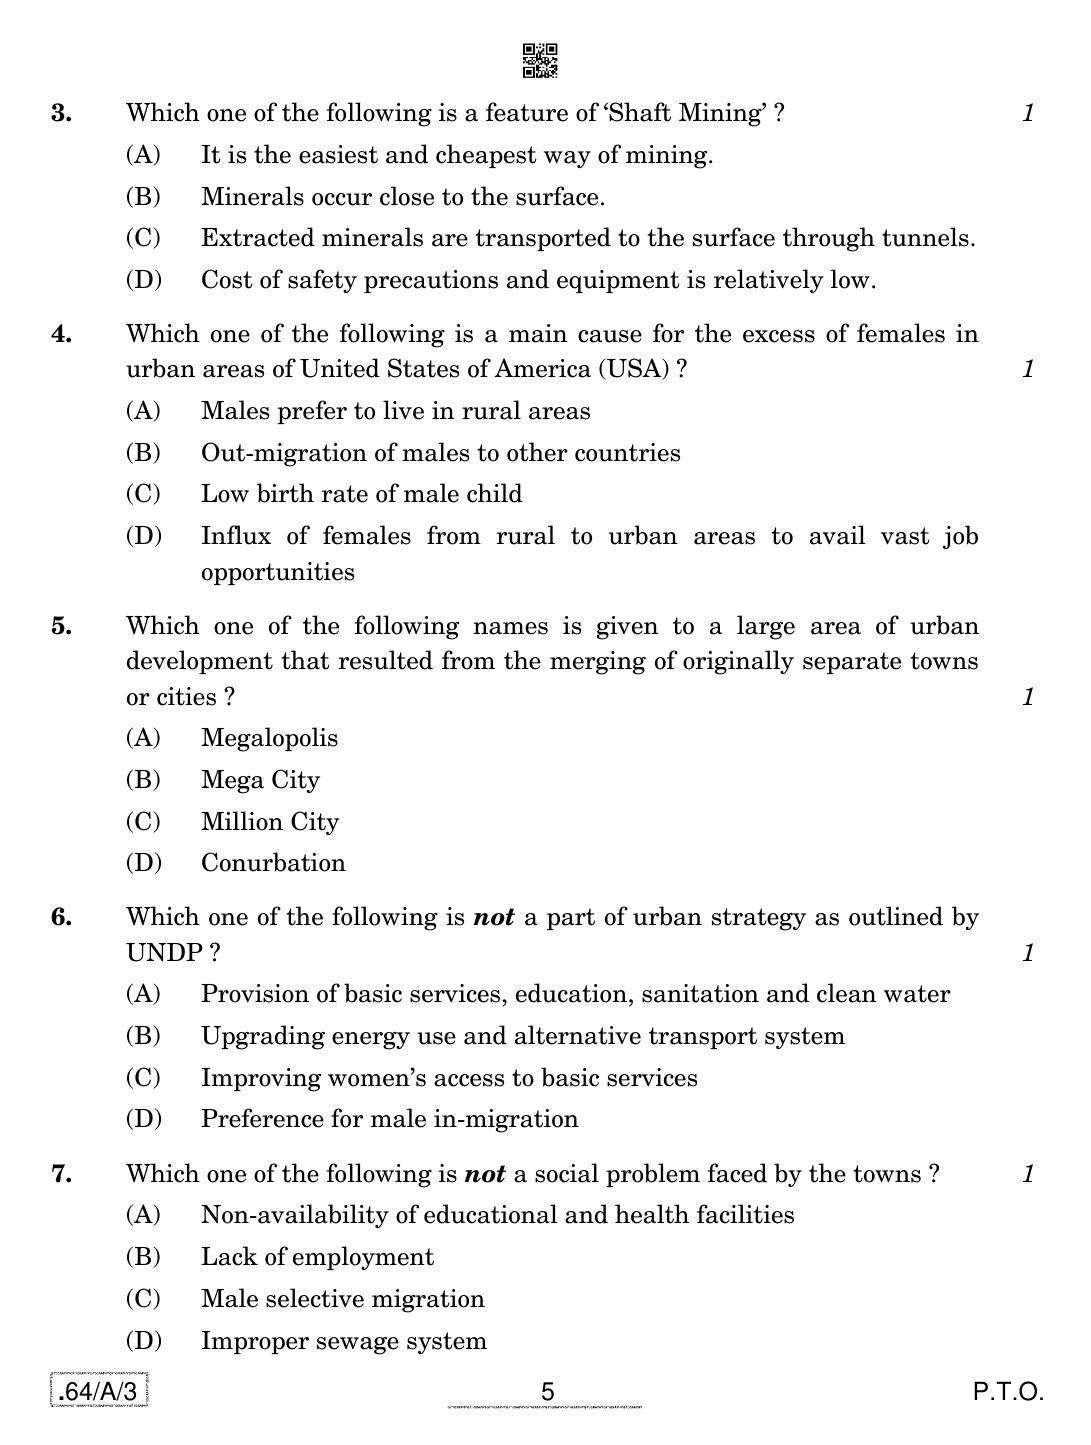 CBSE Class 12 64-C-3 - Geography 2020 Compartment Question Paper - Page 5